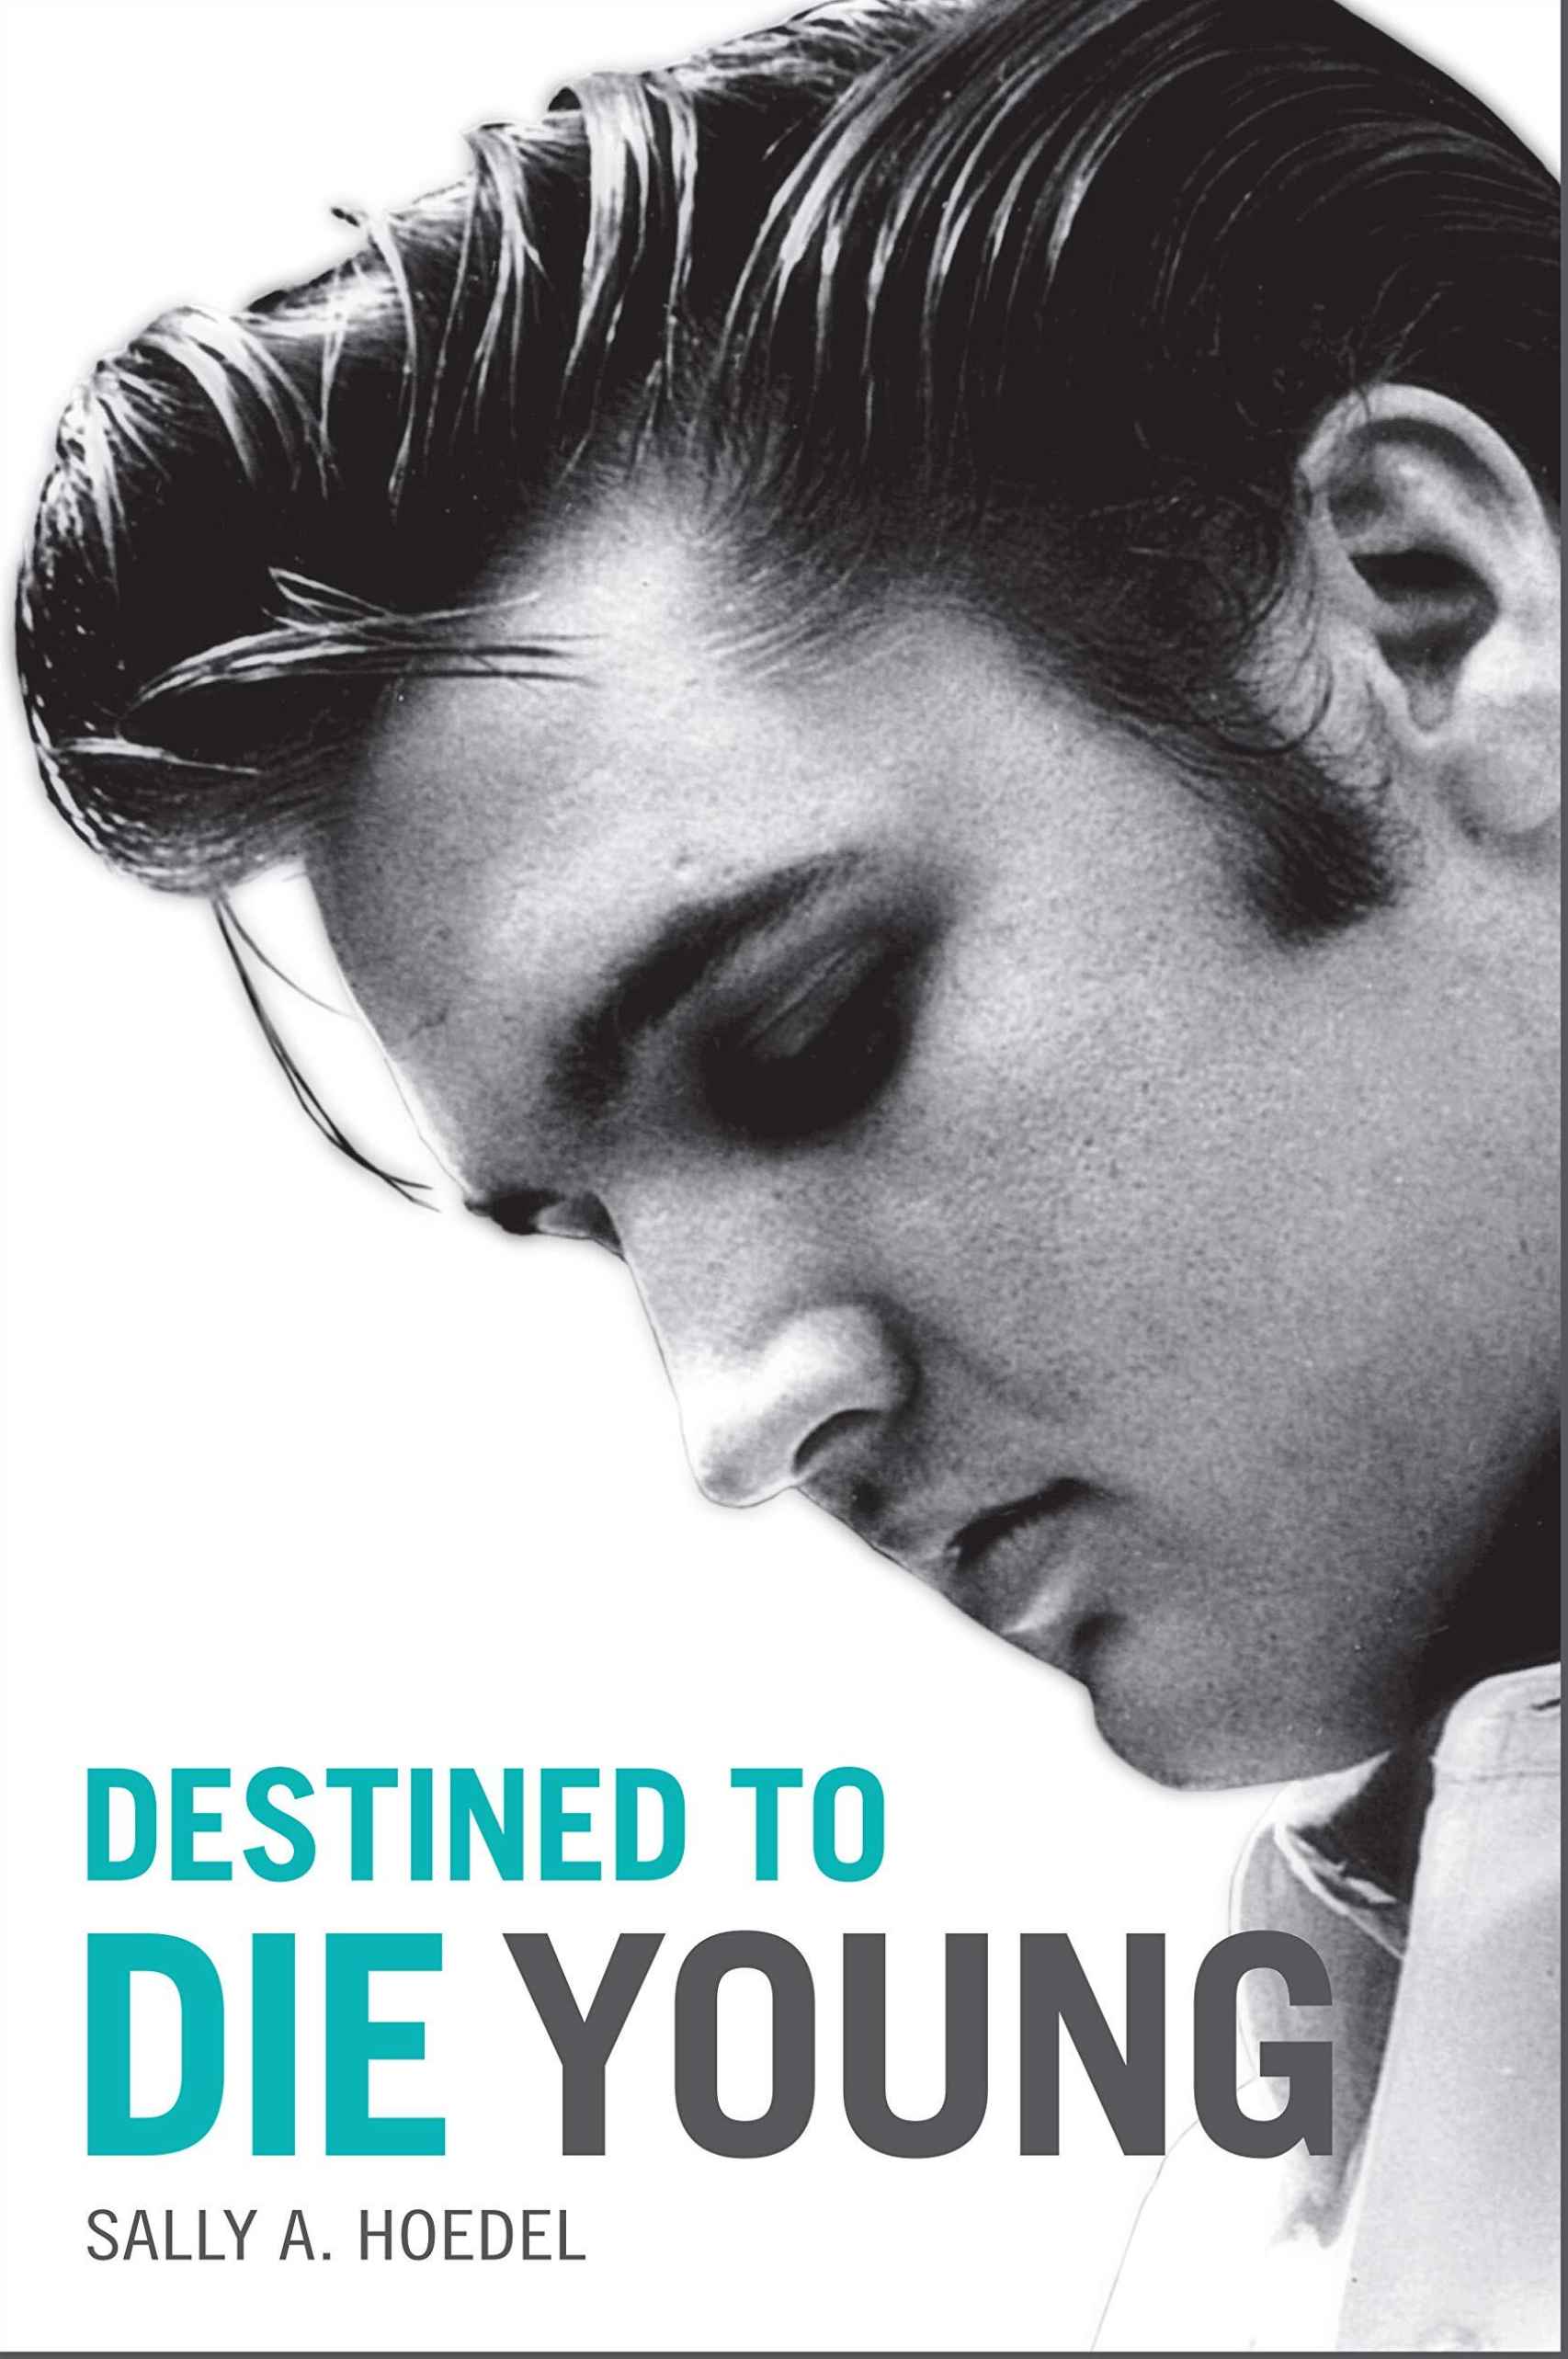 Elvis: Destined to die young